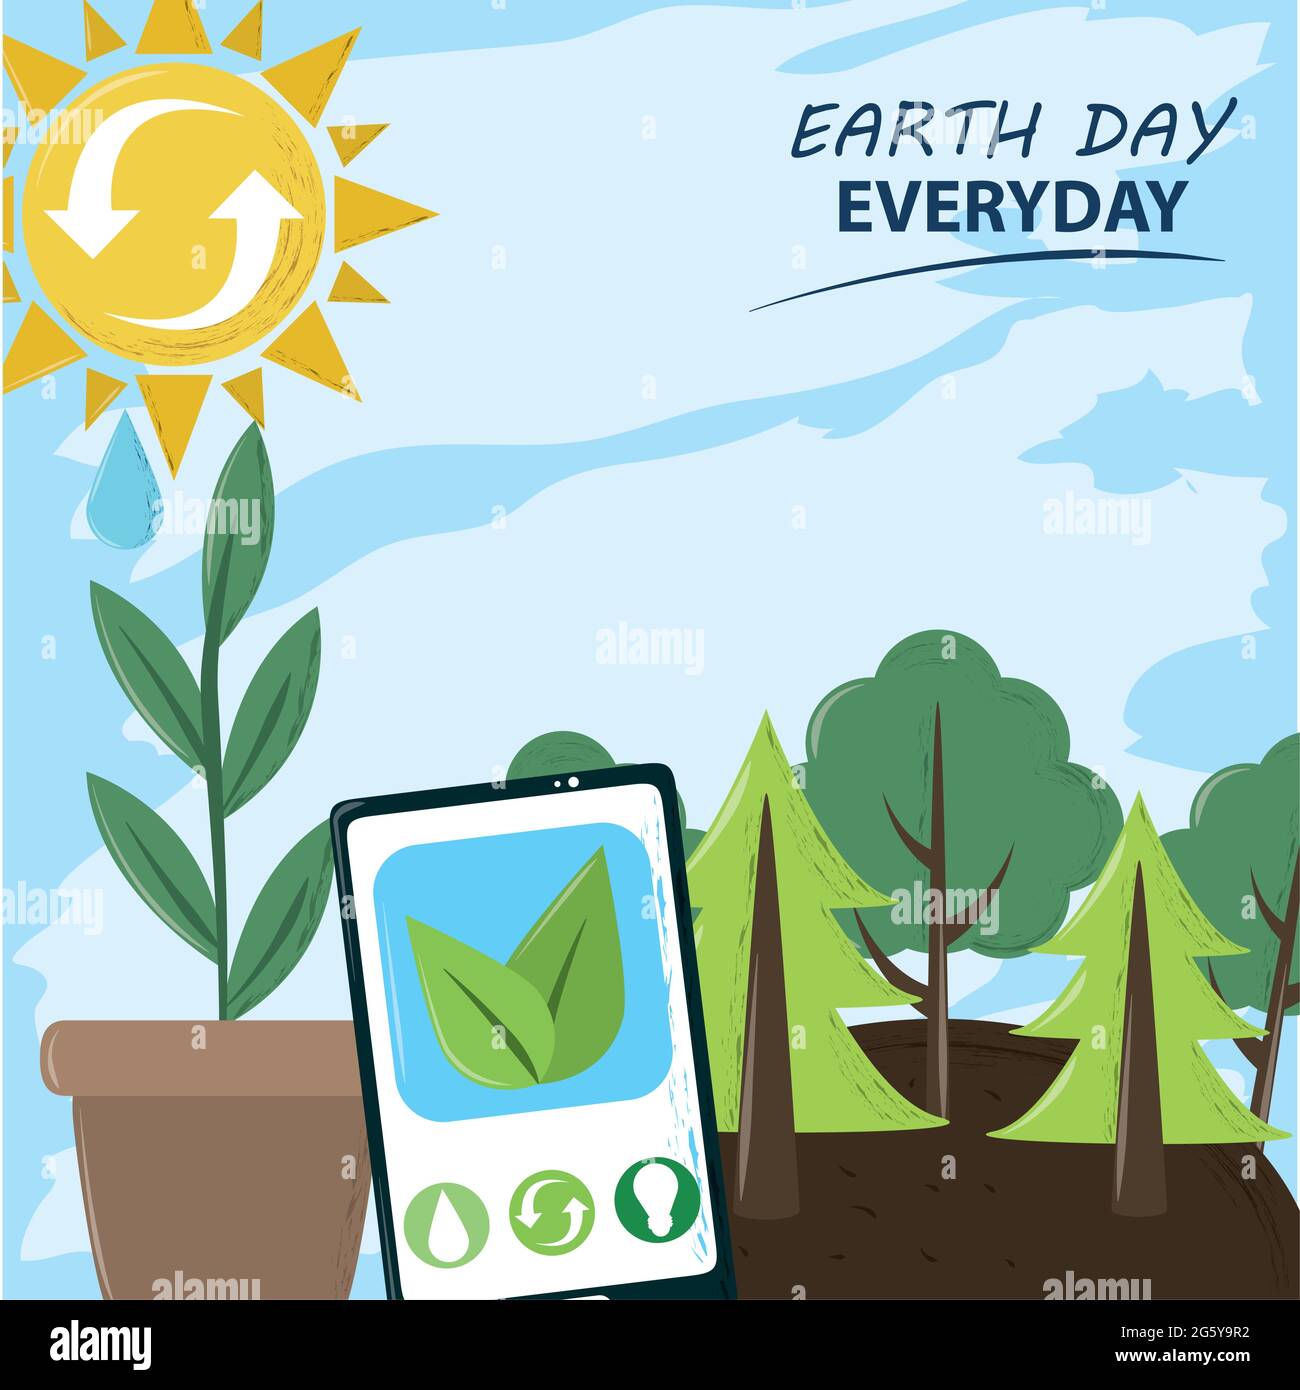 earth day everyday Stock Vector